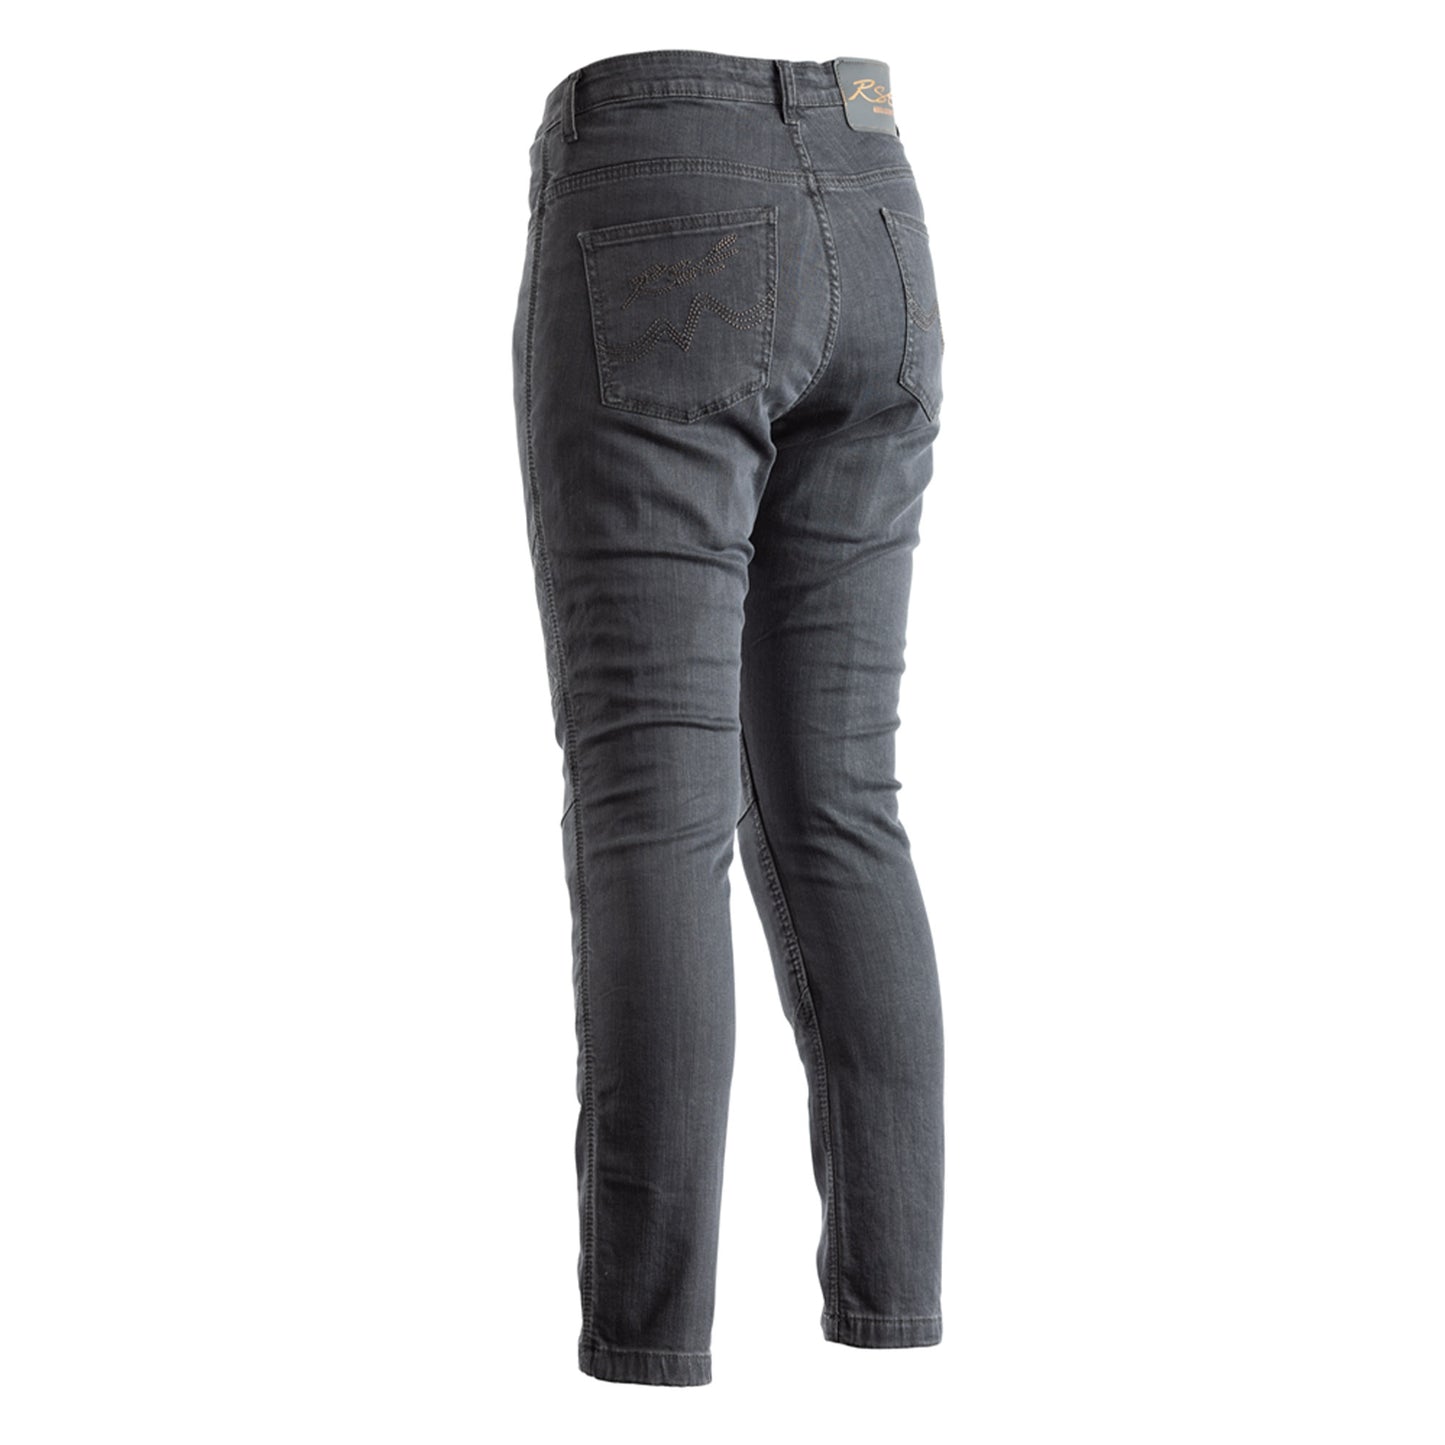 RST Reinforced Straight Leg (CE) Ladies Jeans - Includes Knee Armour - Regular Length - Grey